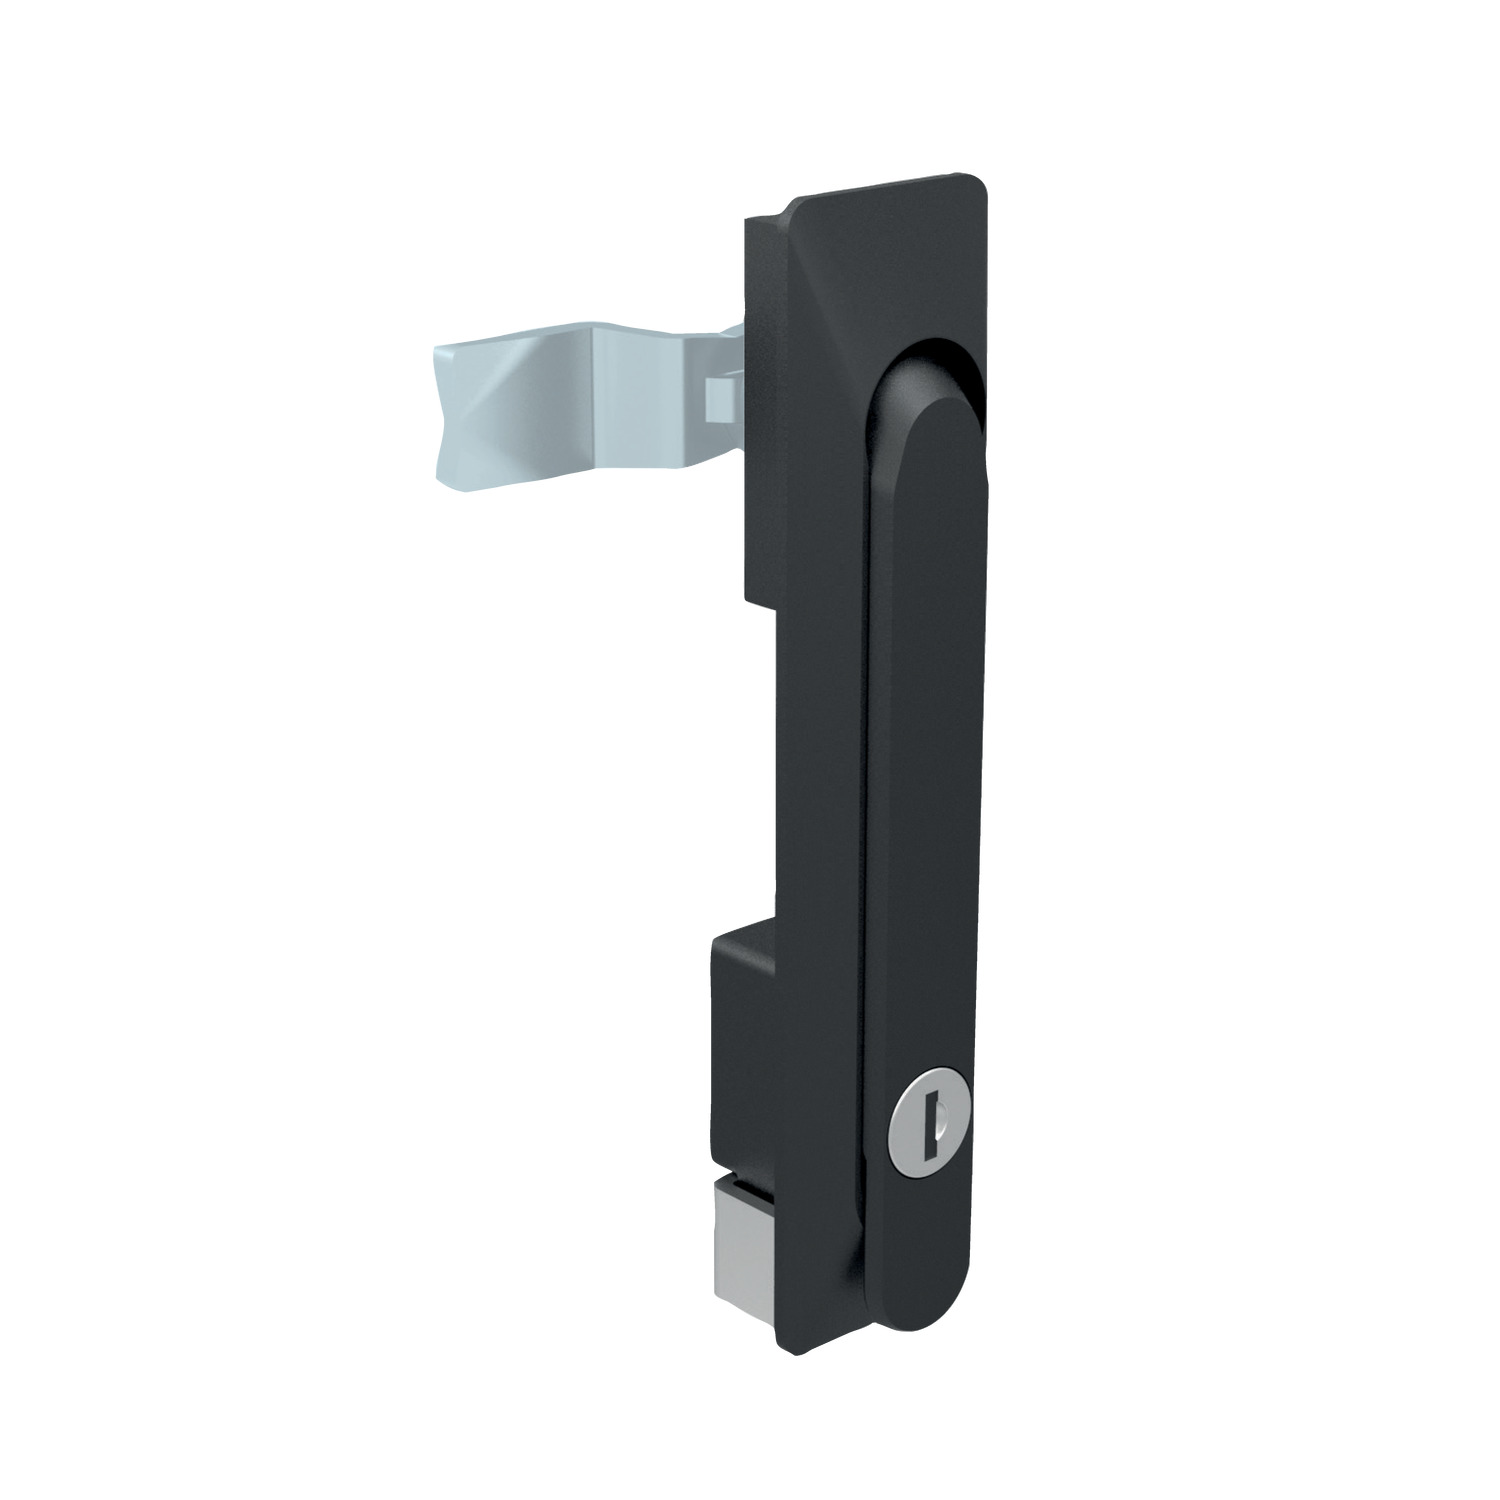 Swing Handles - Cam Control For attractive easy functional opening of telecom and data cabinets as well as other industrial enclosures. Lock and handle in one attractive design.